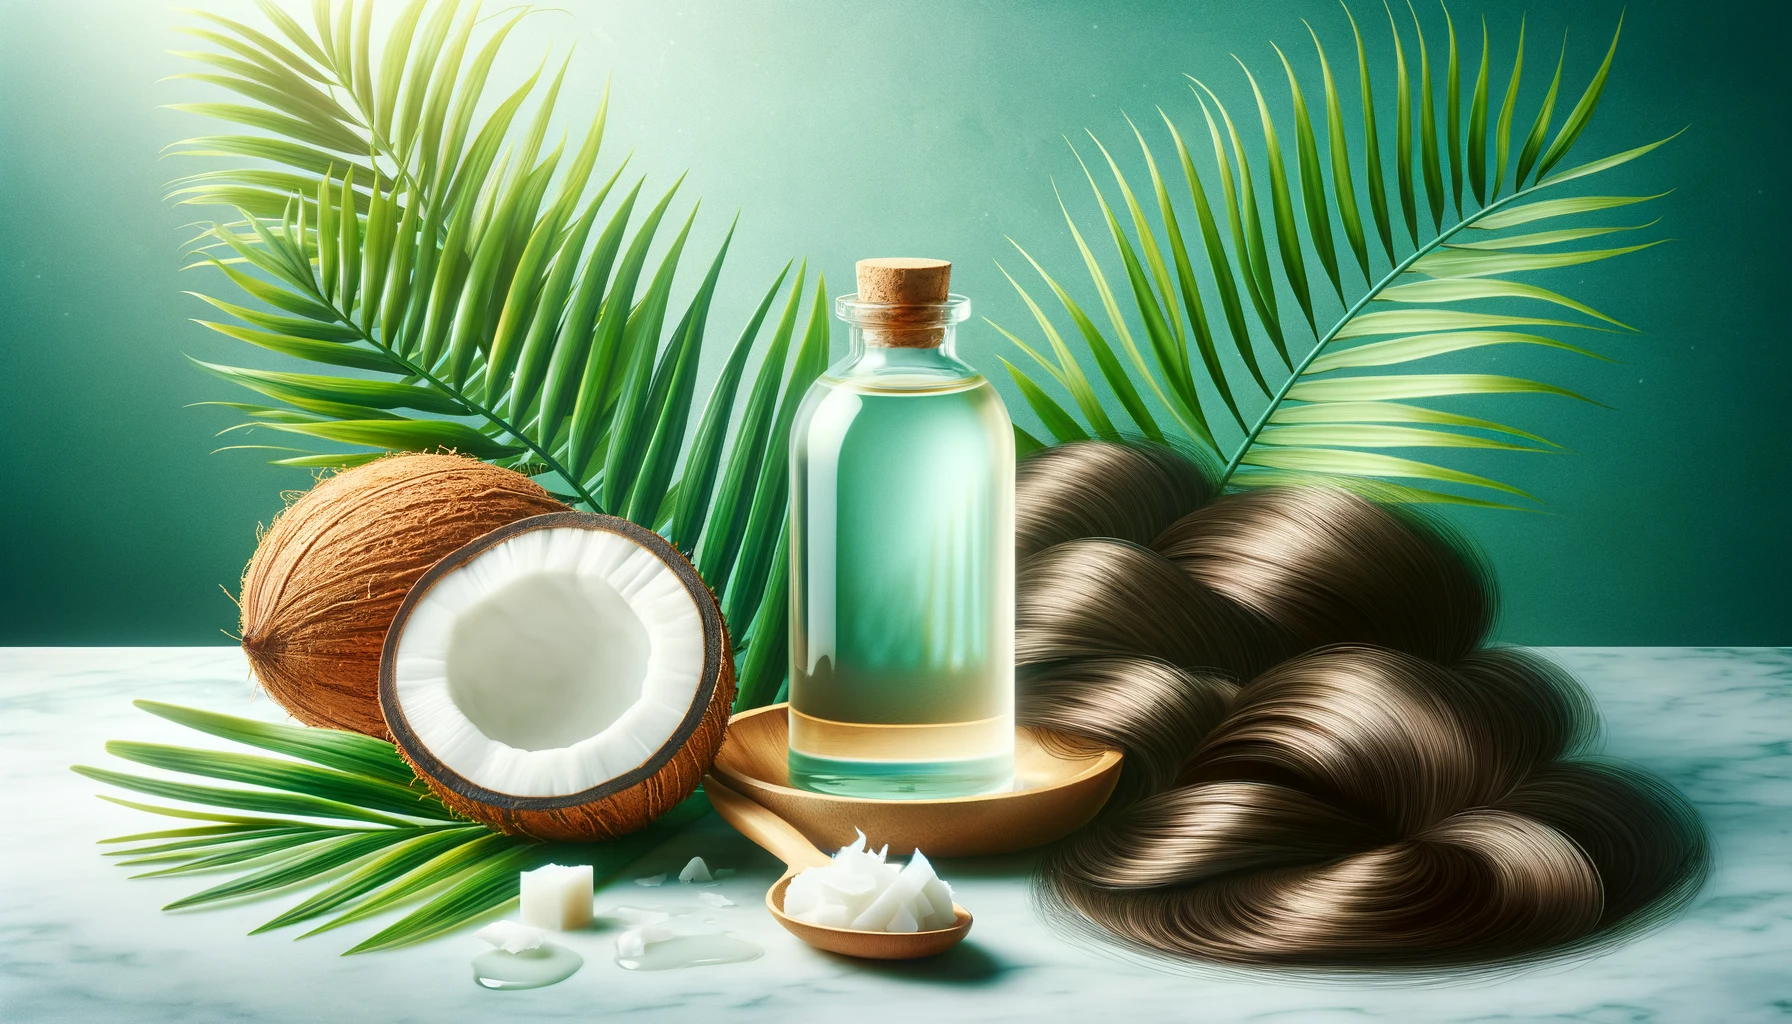 blog featured image for the post about using coconut oil for hair growth and thickness